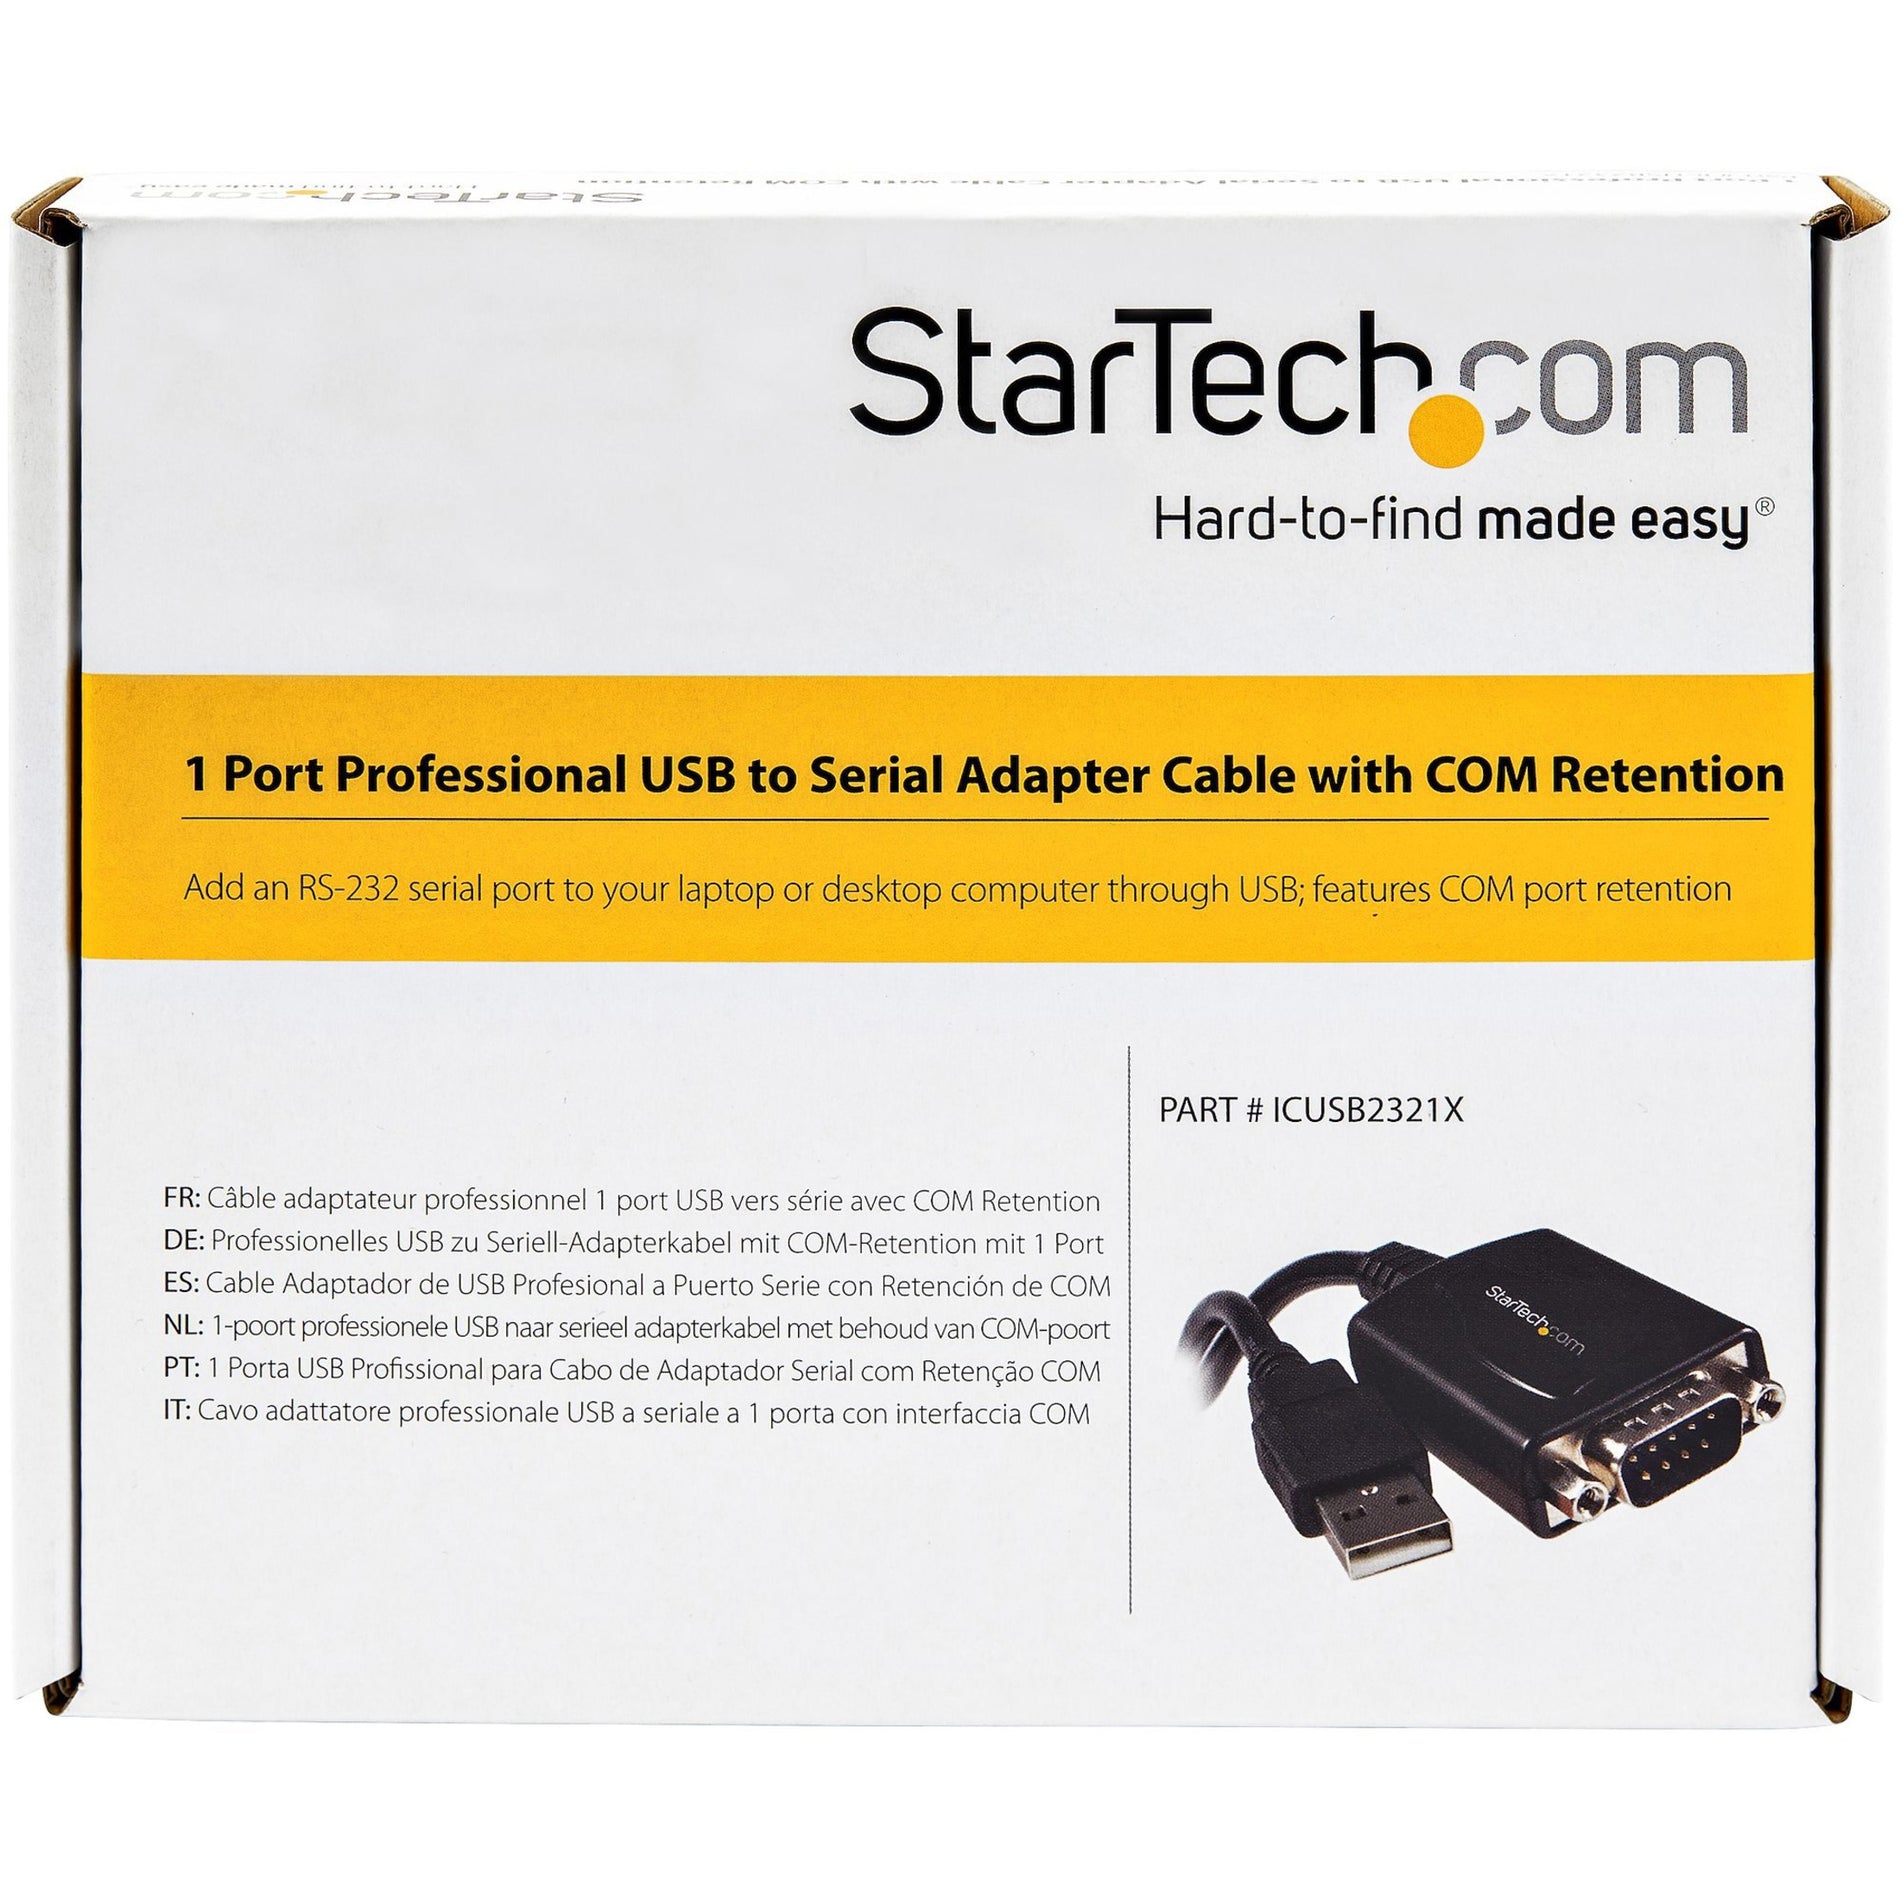 StarTech.com ICUSB2321X 1 Port Professional USB to Serial Adapter Cable with COM Retention, 2-Year Warranty, Windows Compatible